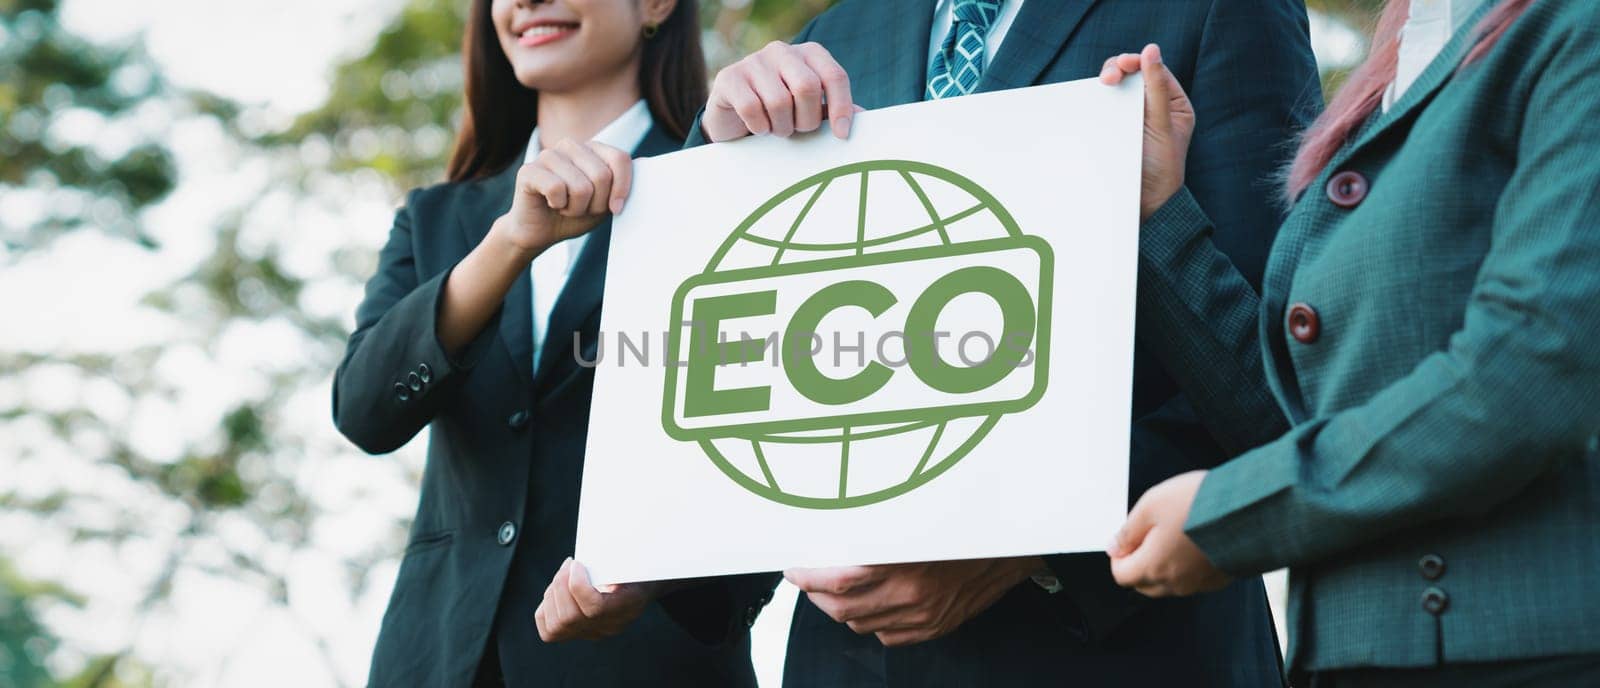 Group of business people stand united, holding eco-friendly idea and concept for environmental awareness campaign embracing eco friendly and greener environment with inspire positive change.Gyre